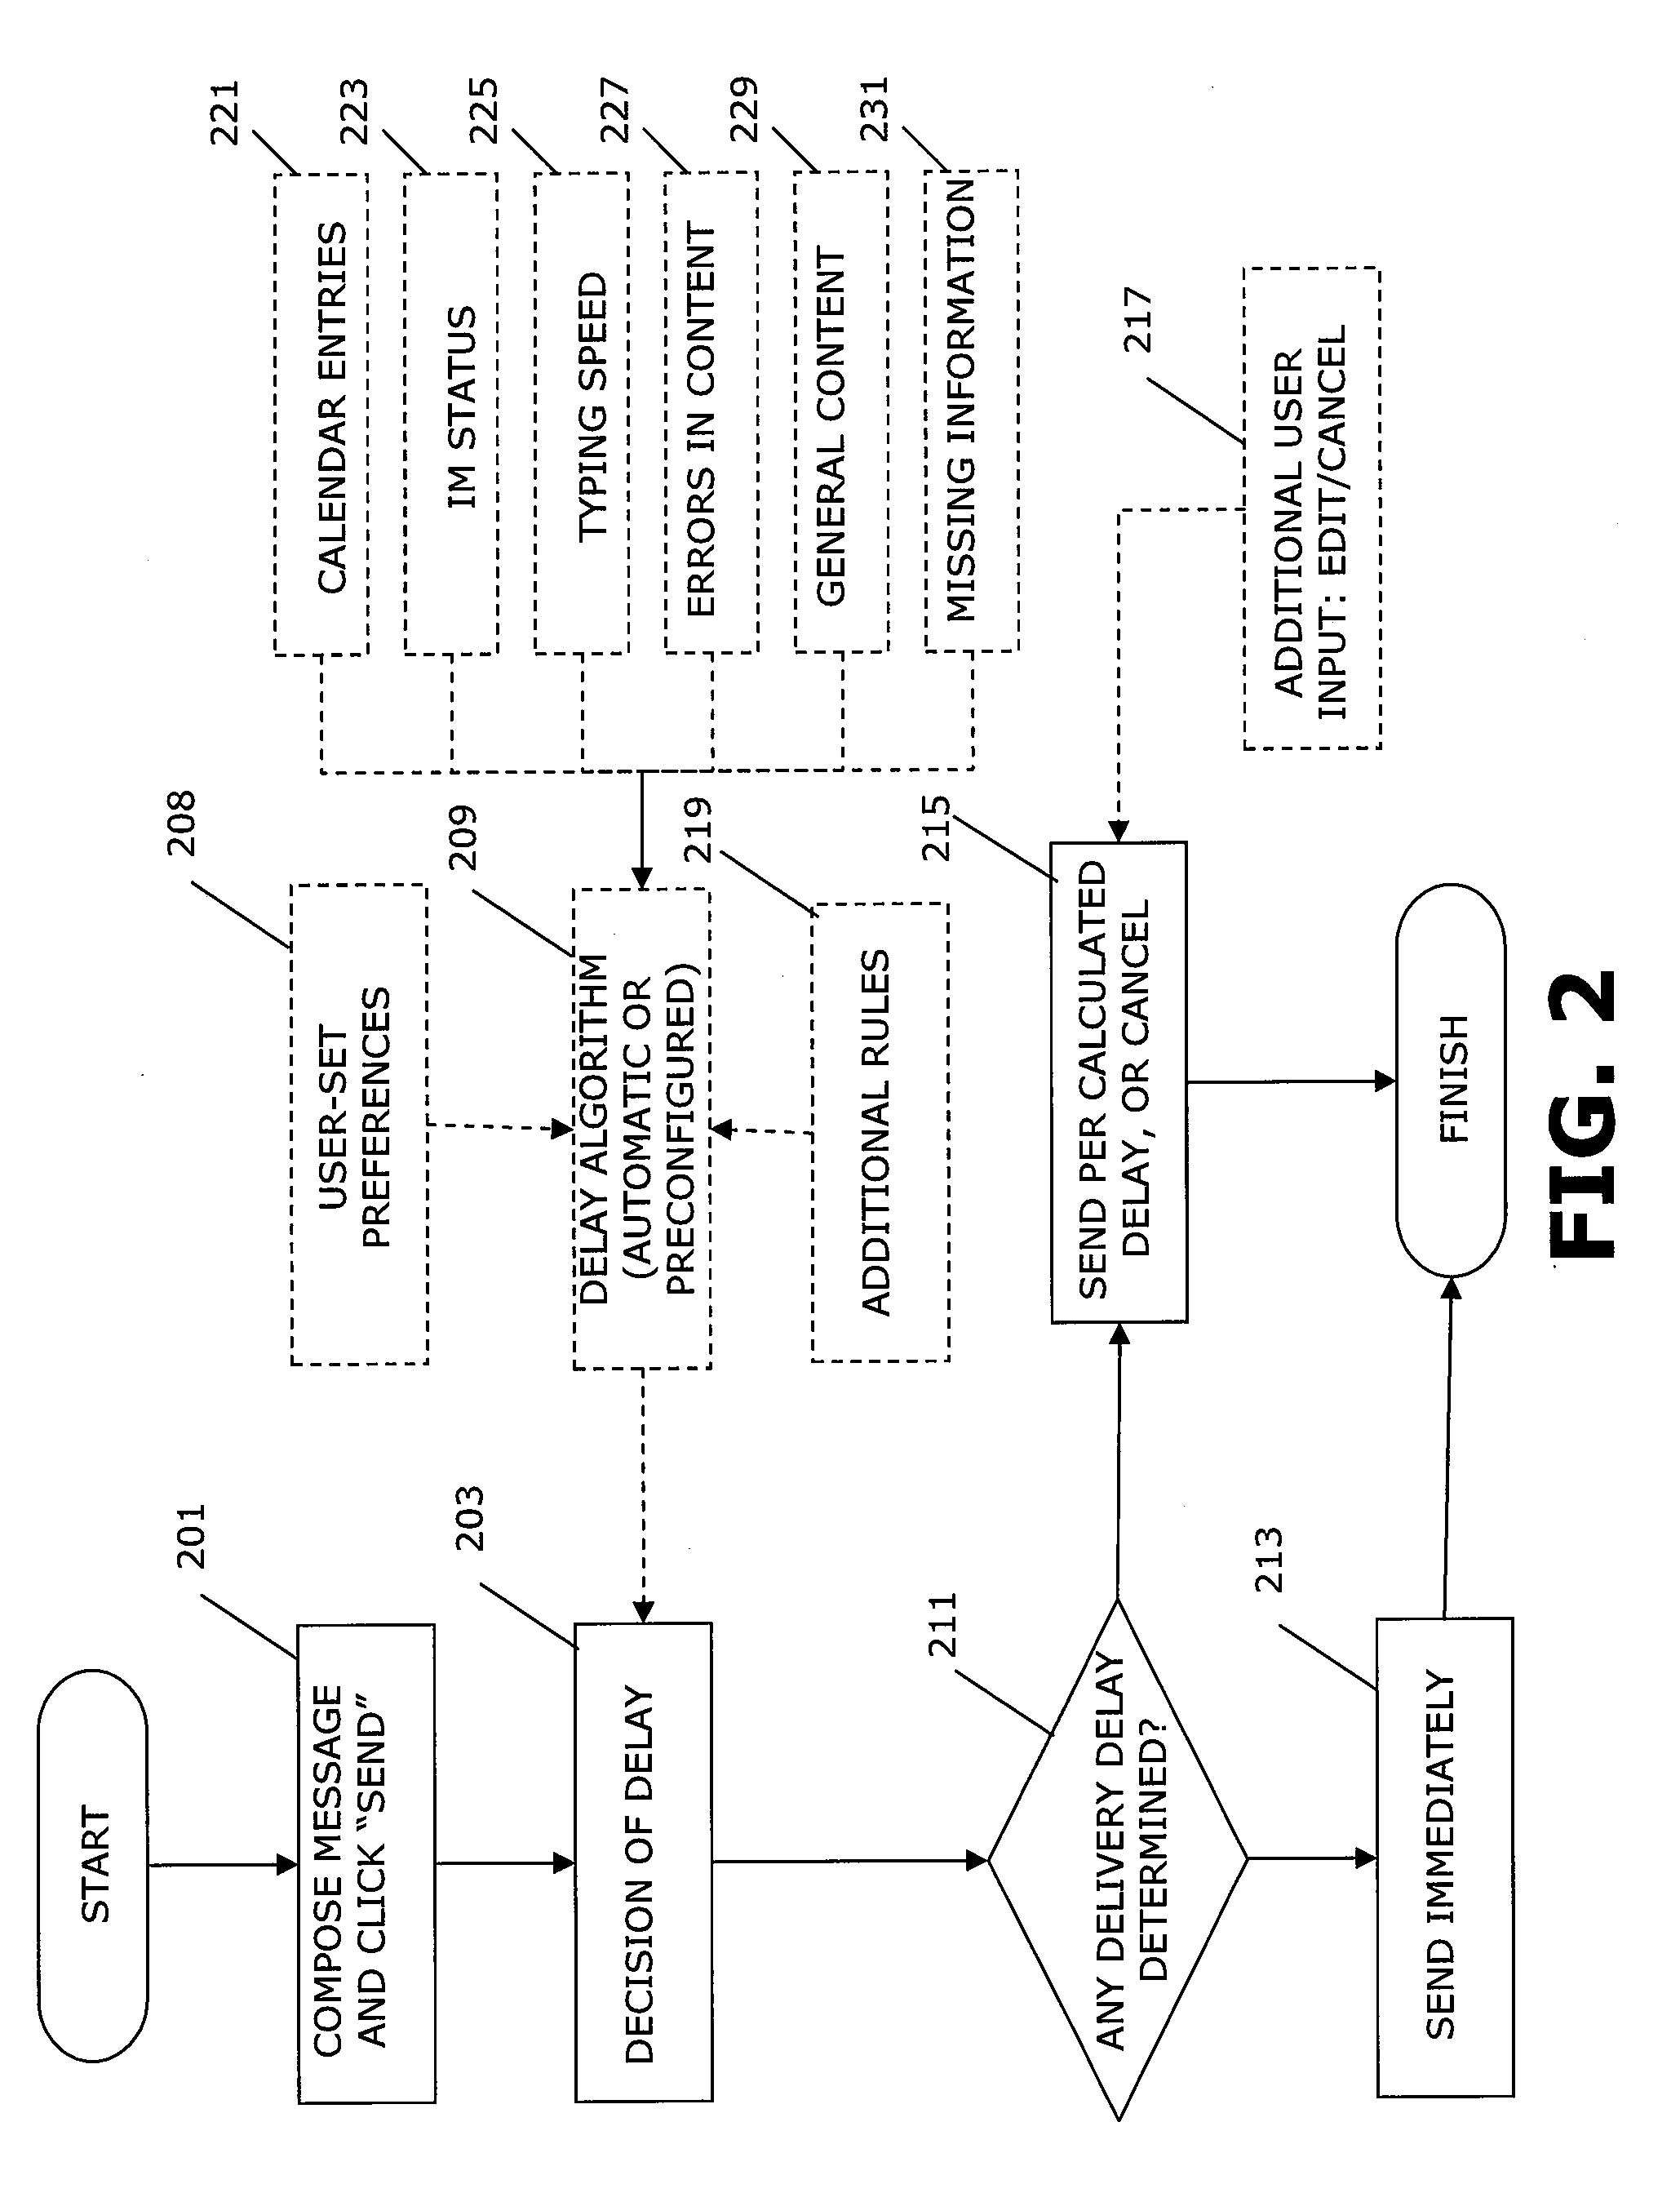 Establishing an automatic communications delay based on prevailing activity factors